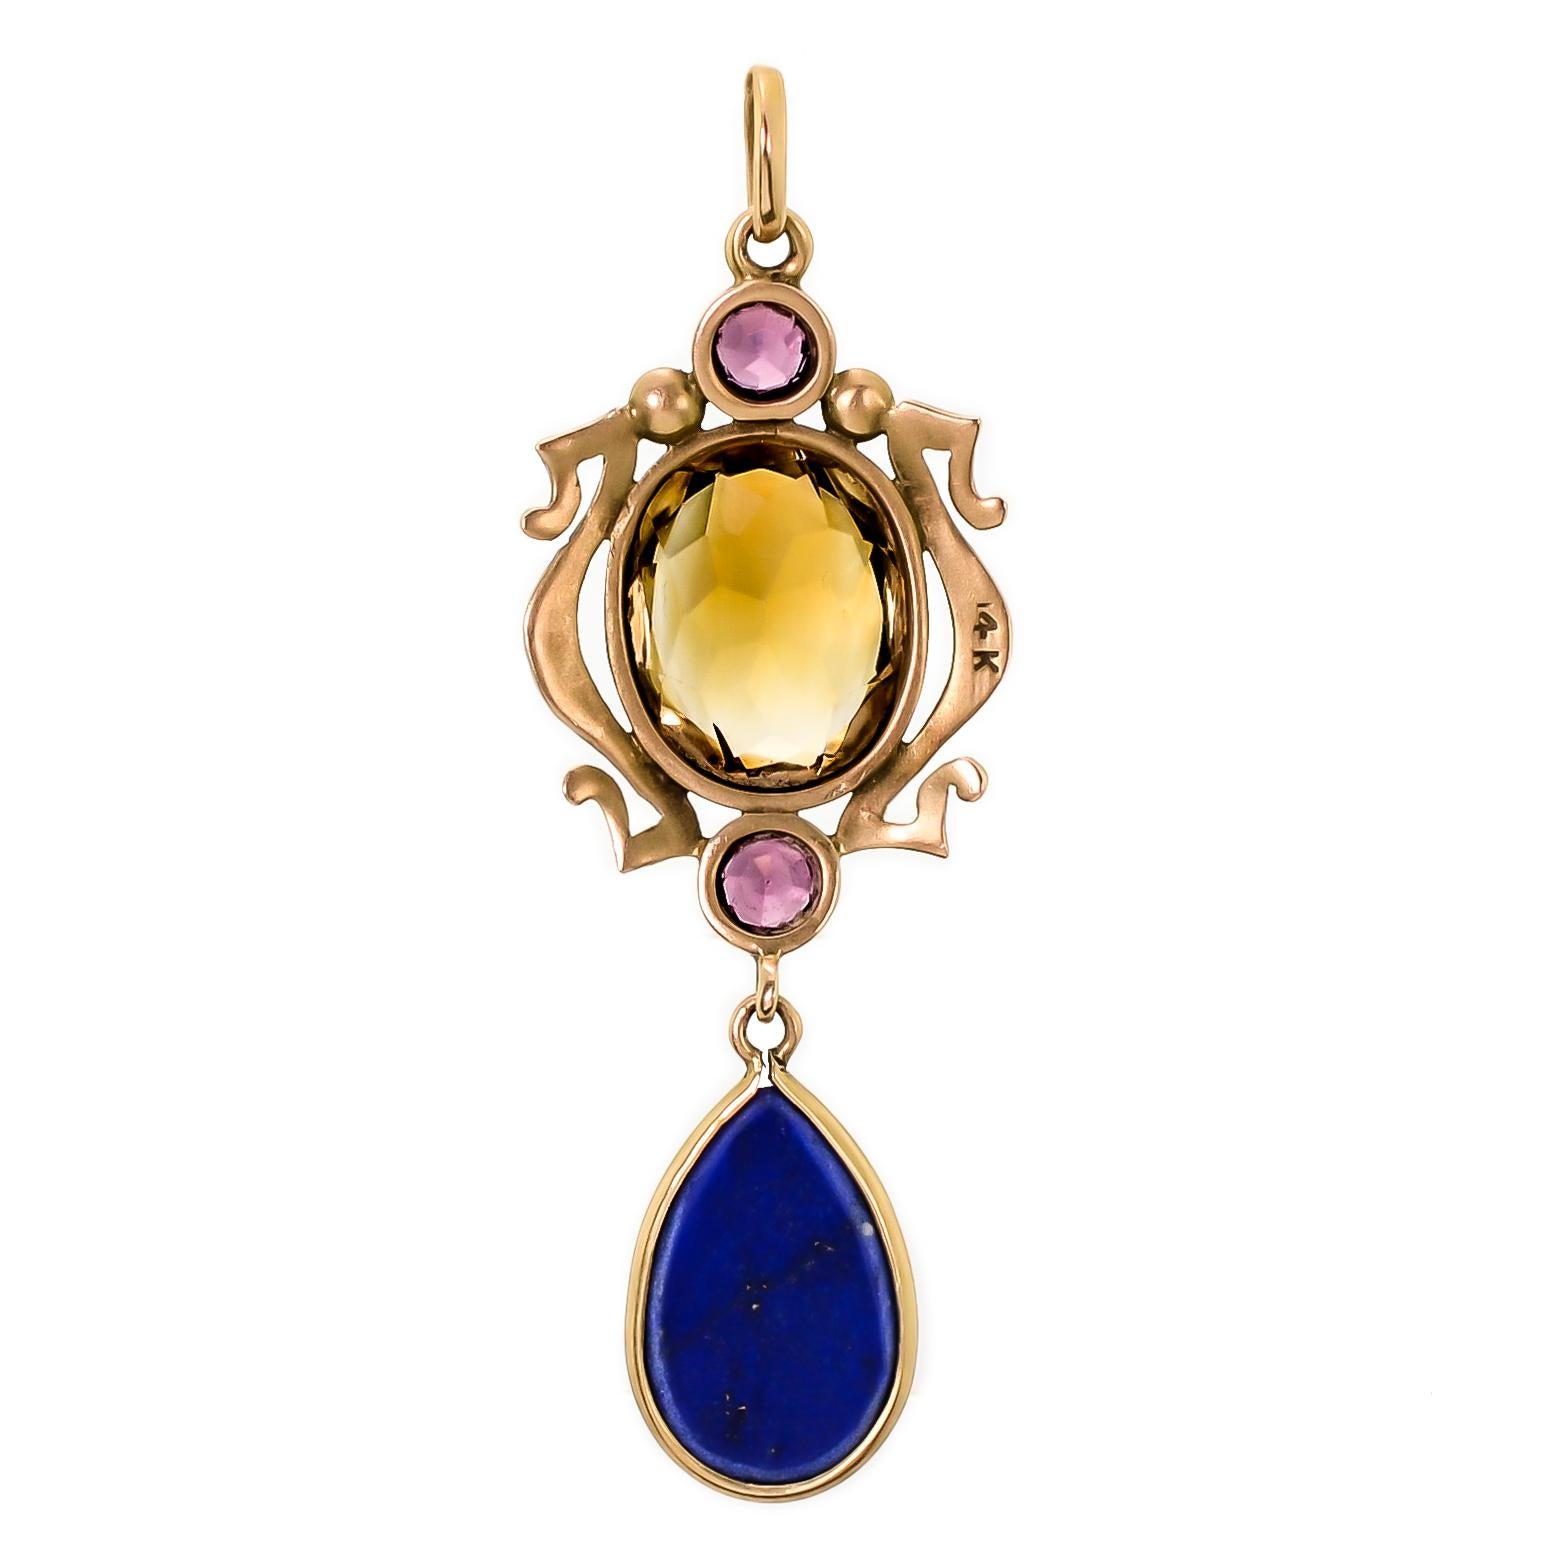 Art Nouveau Turn-of-the-Century Citrine, Lapis, Ruby, and Seed Pearl Pendant In Good Condition For Sale In Wheaton, IL